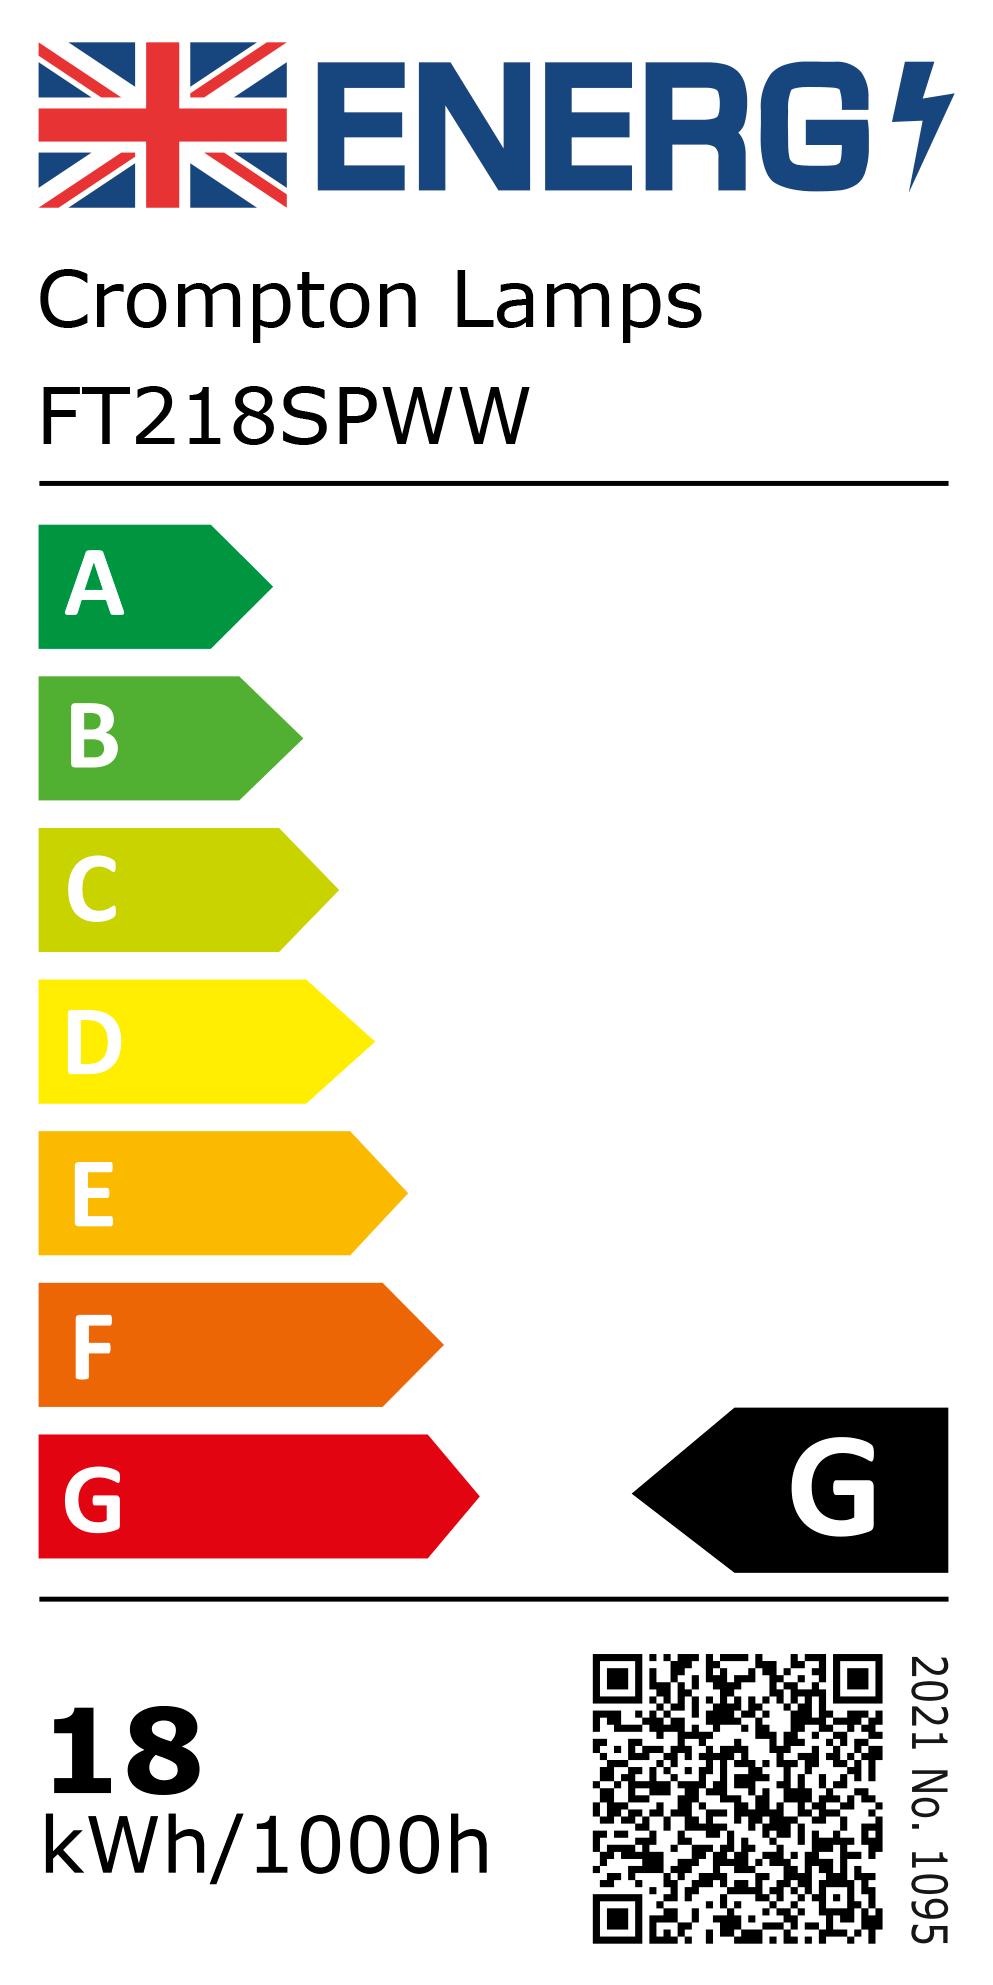 New 2021 Energy Rating Label: Stock Code FT218SPWW